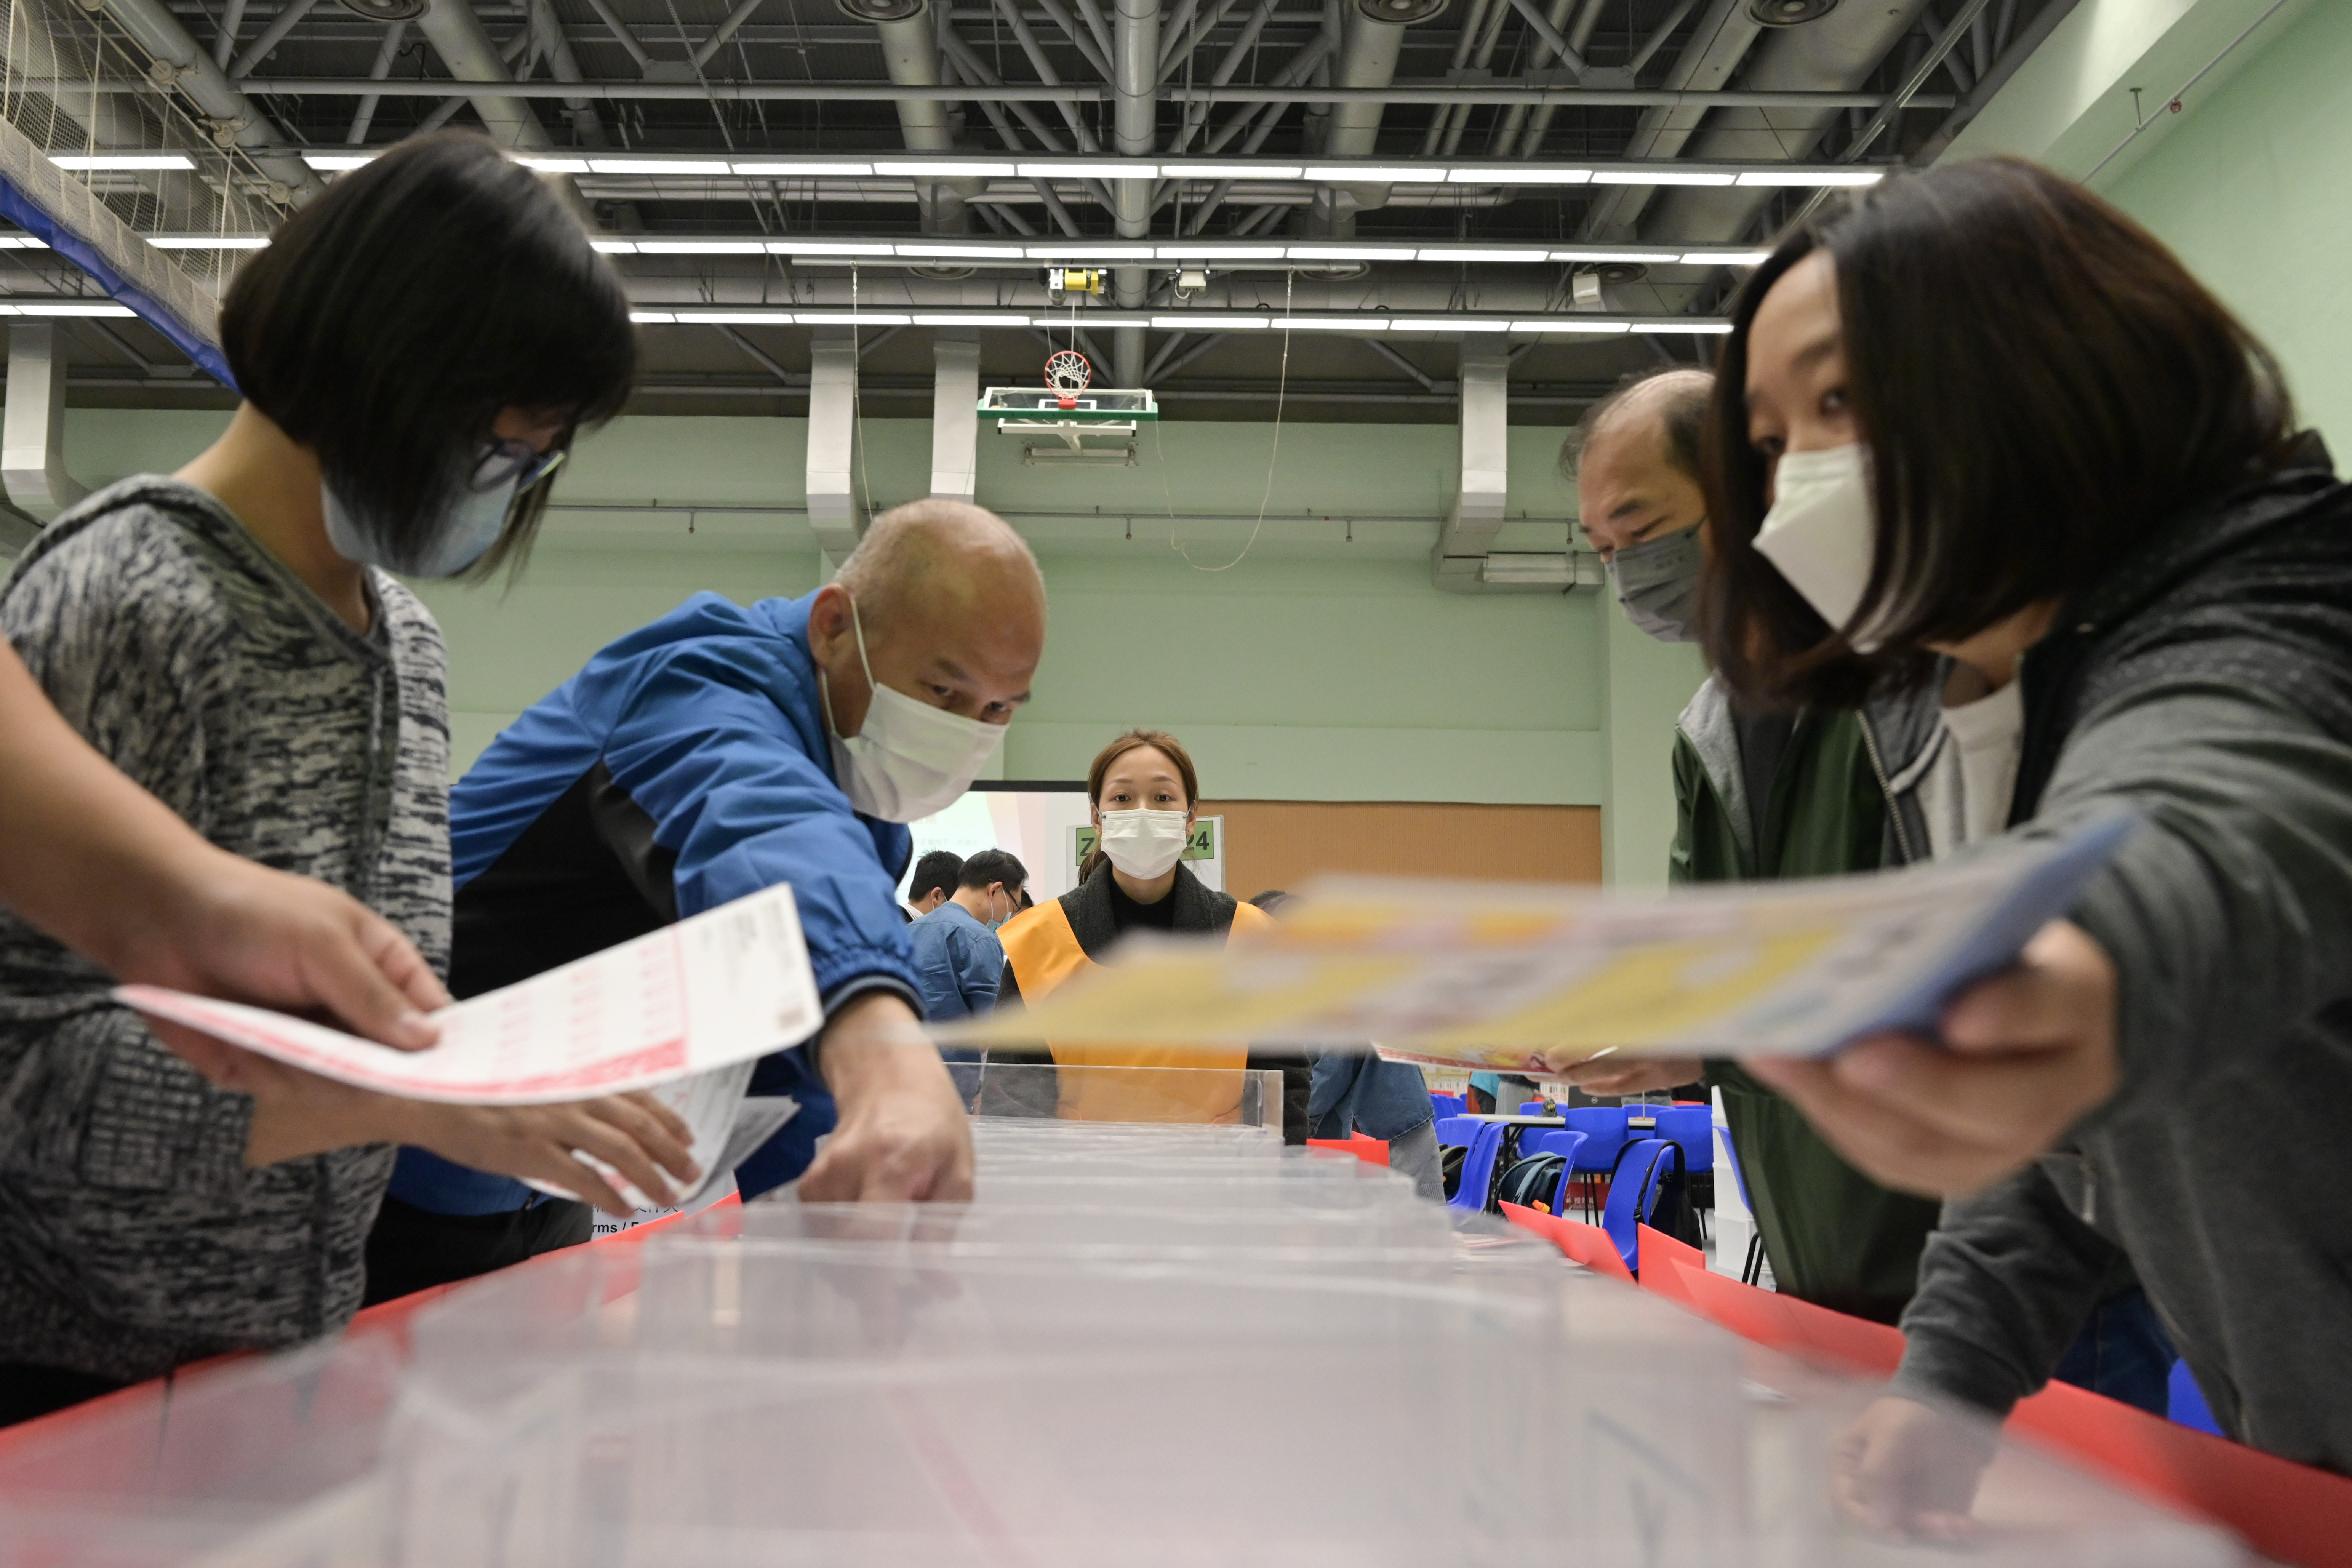 The 2021 Legislative Council General Election will be held on December 19. The Registration and Electoral Office arranged in the past two weeks training and practice sessions with simulated scenarios for staff who will work in polling, counting and central counting stations. Photo shows counting staff in a simulation of sorting ballot papers.